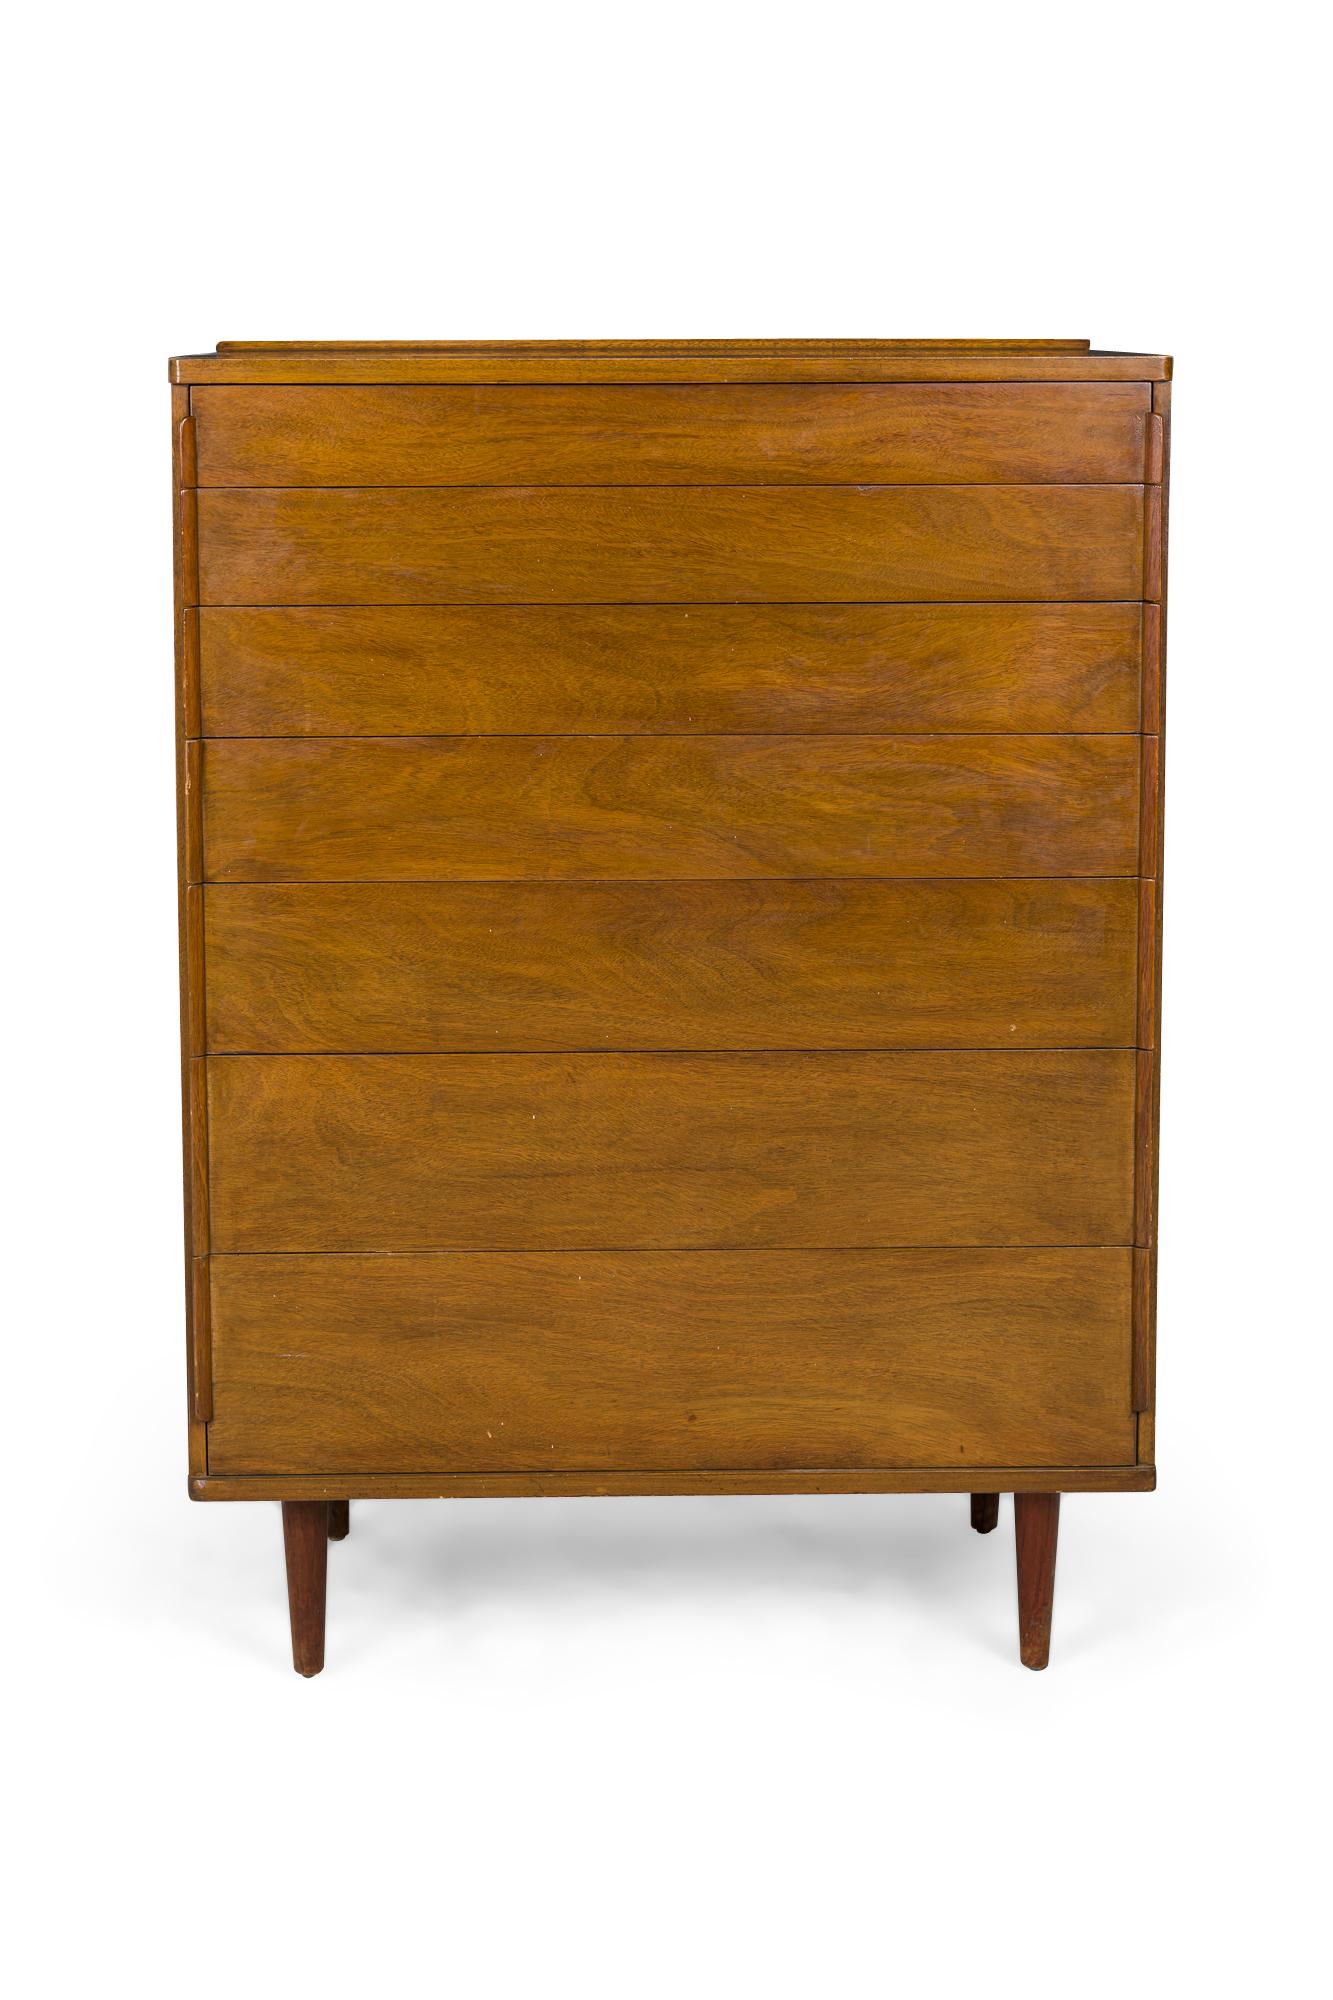 Pair of American mid-century 7-drawer chest with graduated drawer sizing, thin plywood drawer pulls on the sides of each drawer front, all in rosewood and walnut veneer, resting on four tapered rosewood dowel legs. (EDWARD WORMLEY FOR DUNBAR